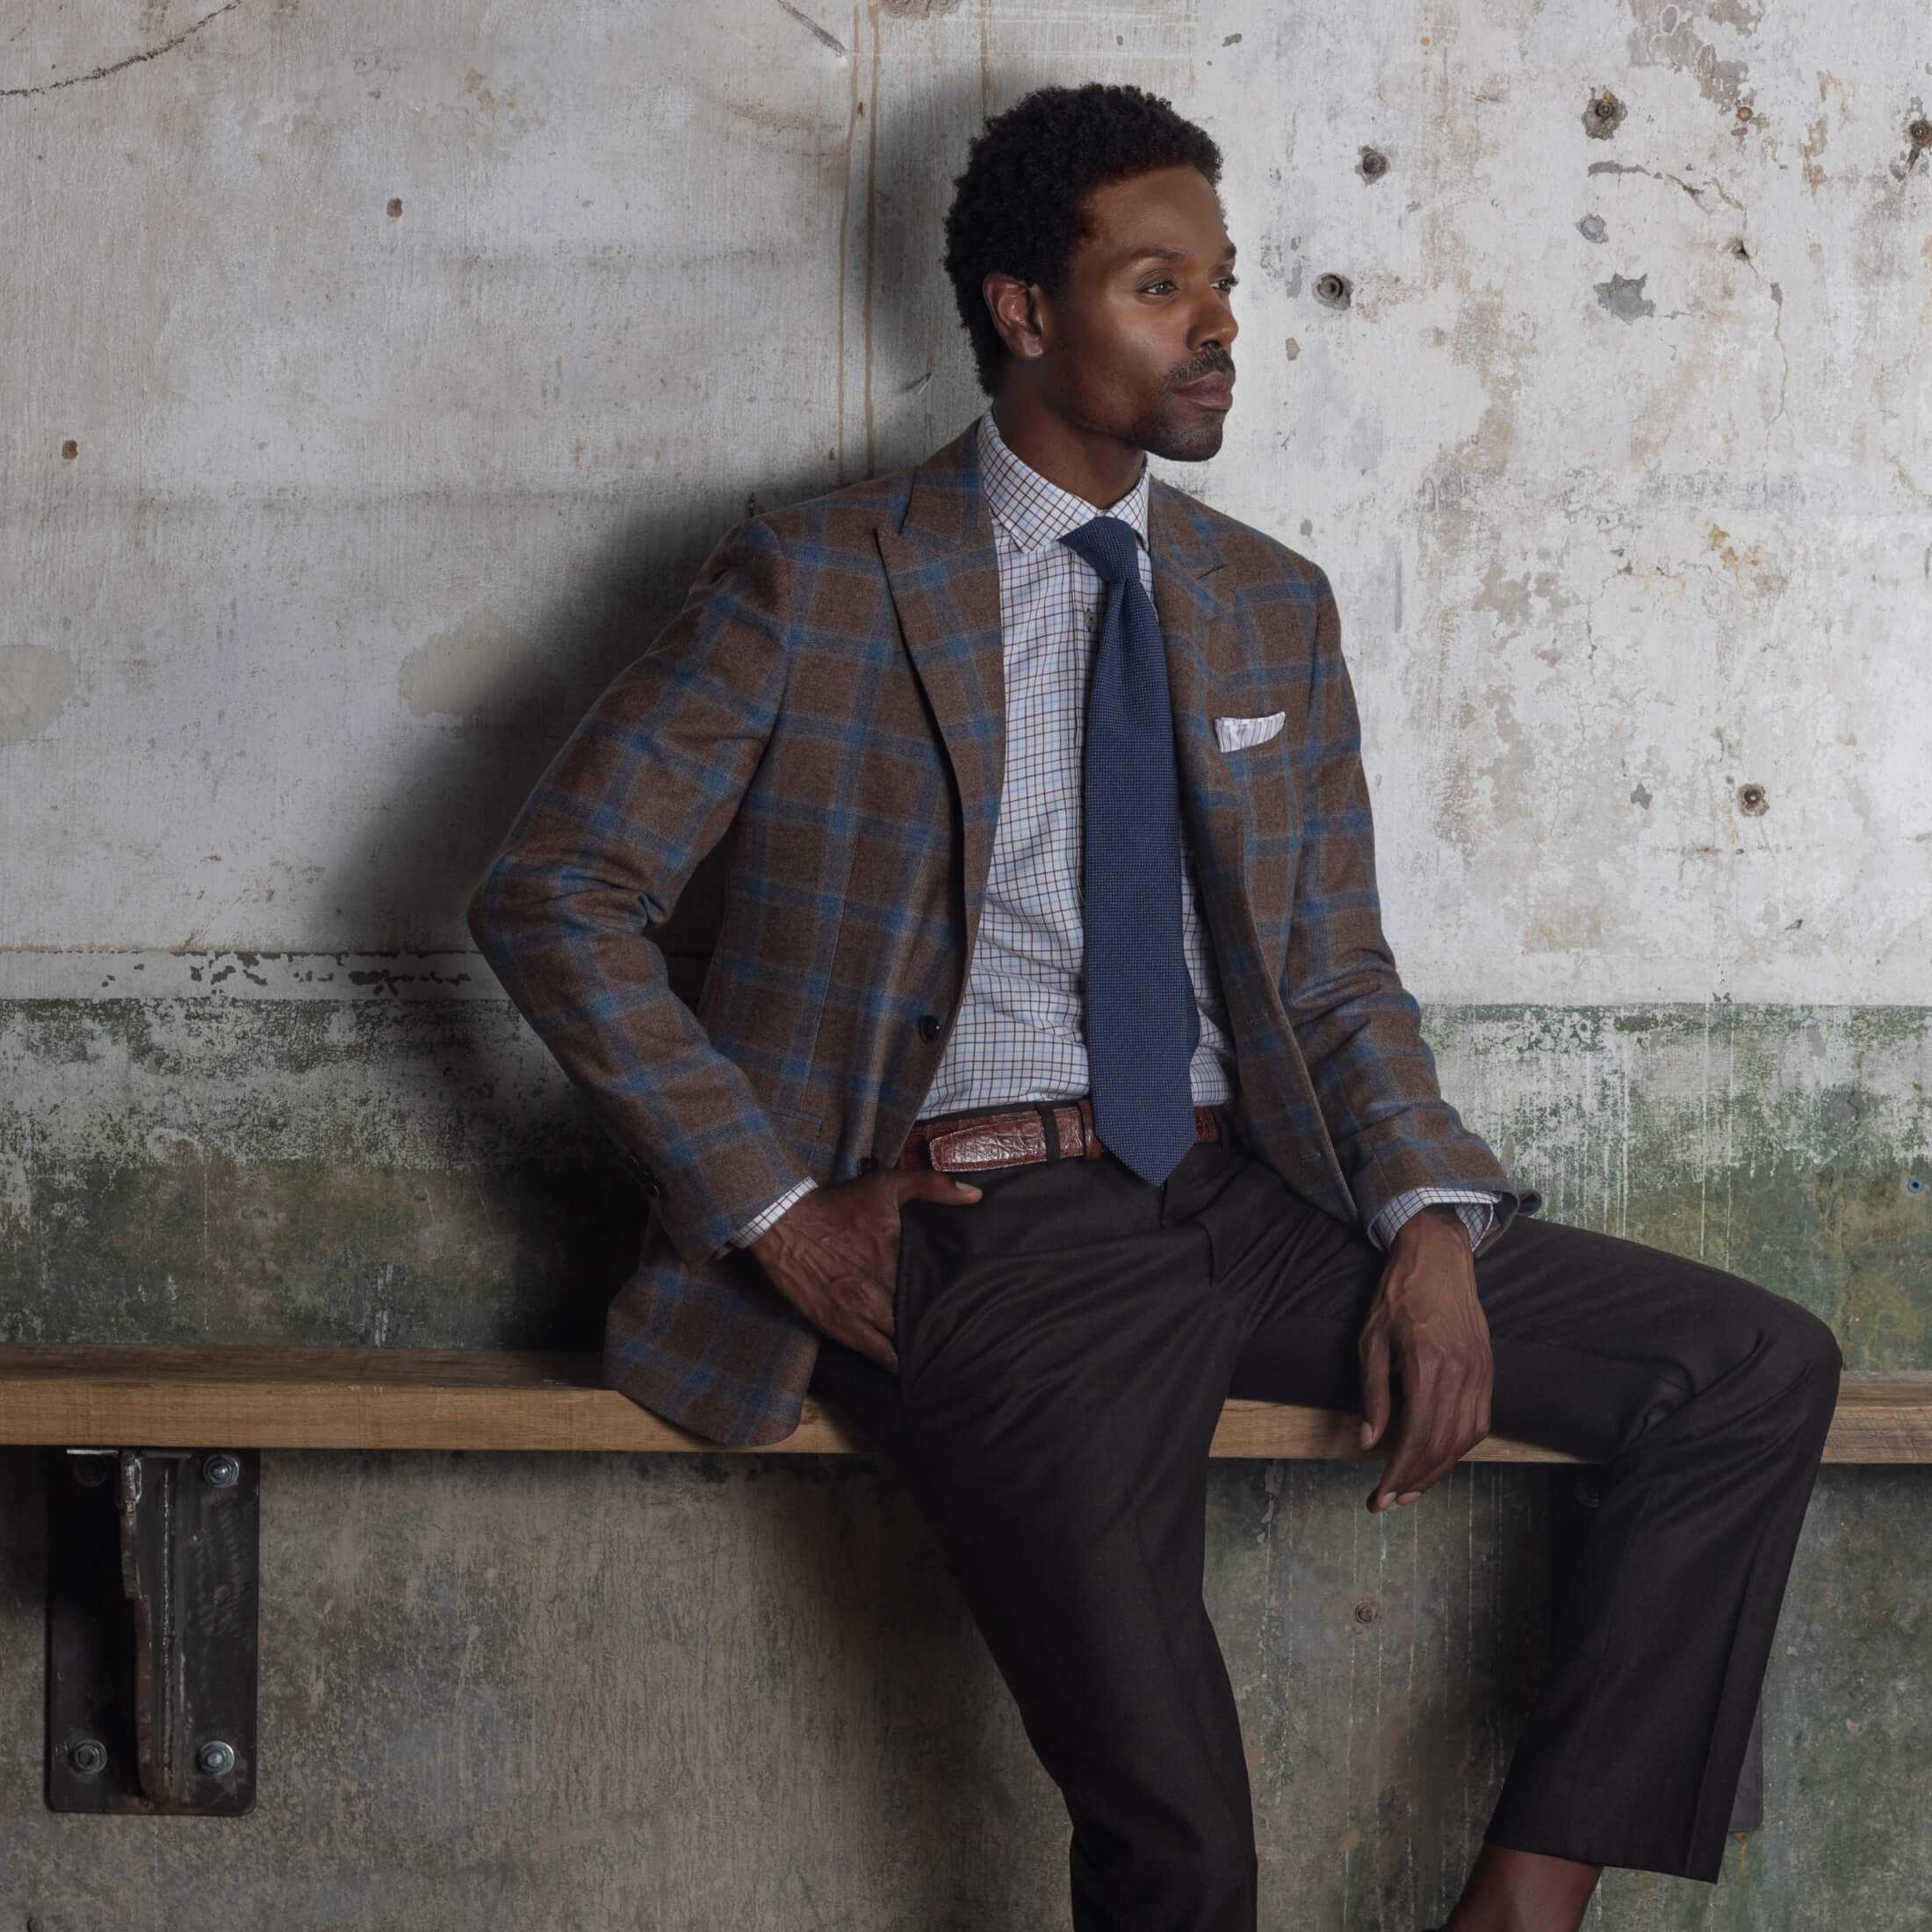 Model sitting on wooden bench against concrete wall wearing Ike Behar sport coat with hand in pocket